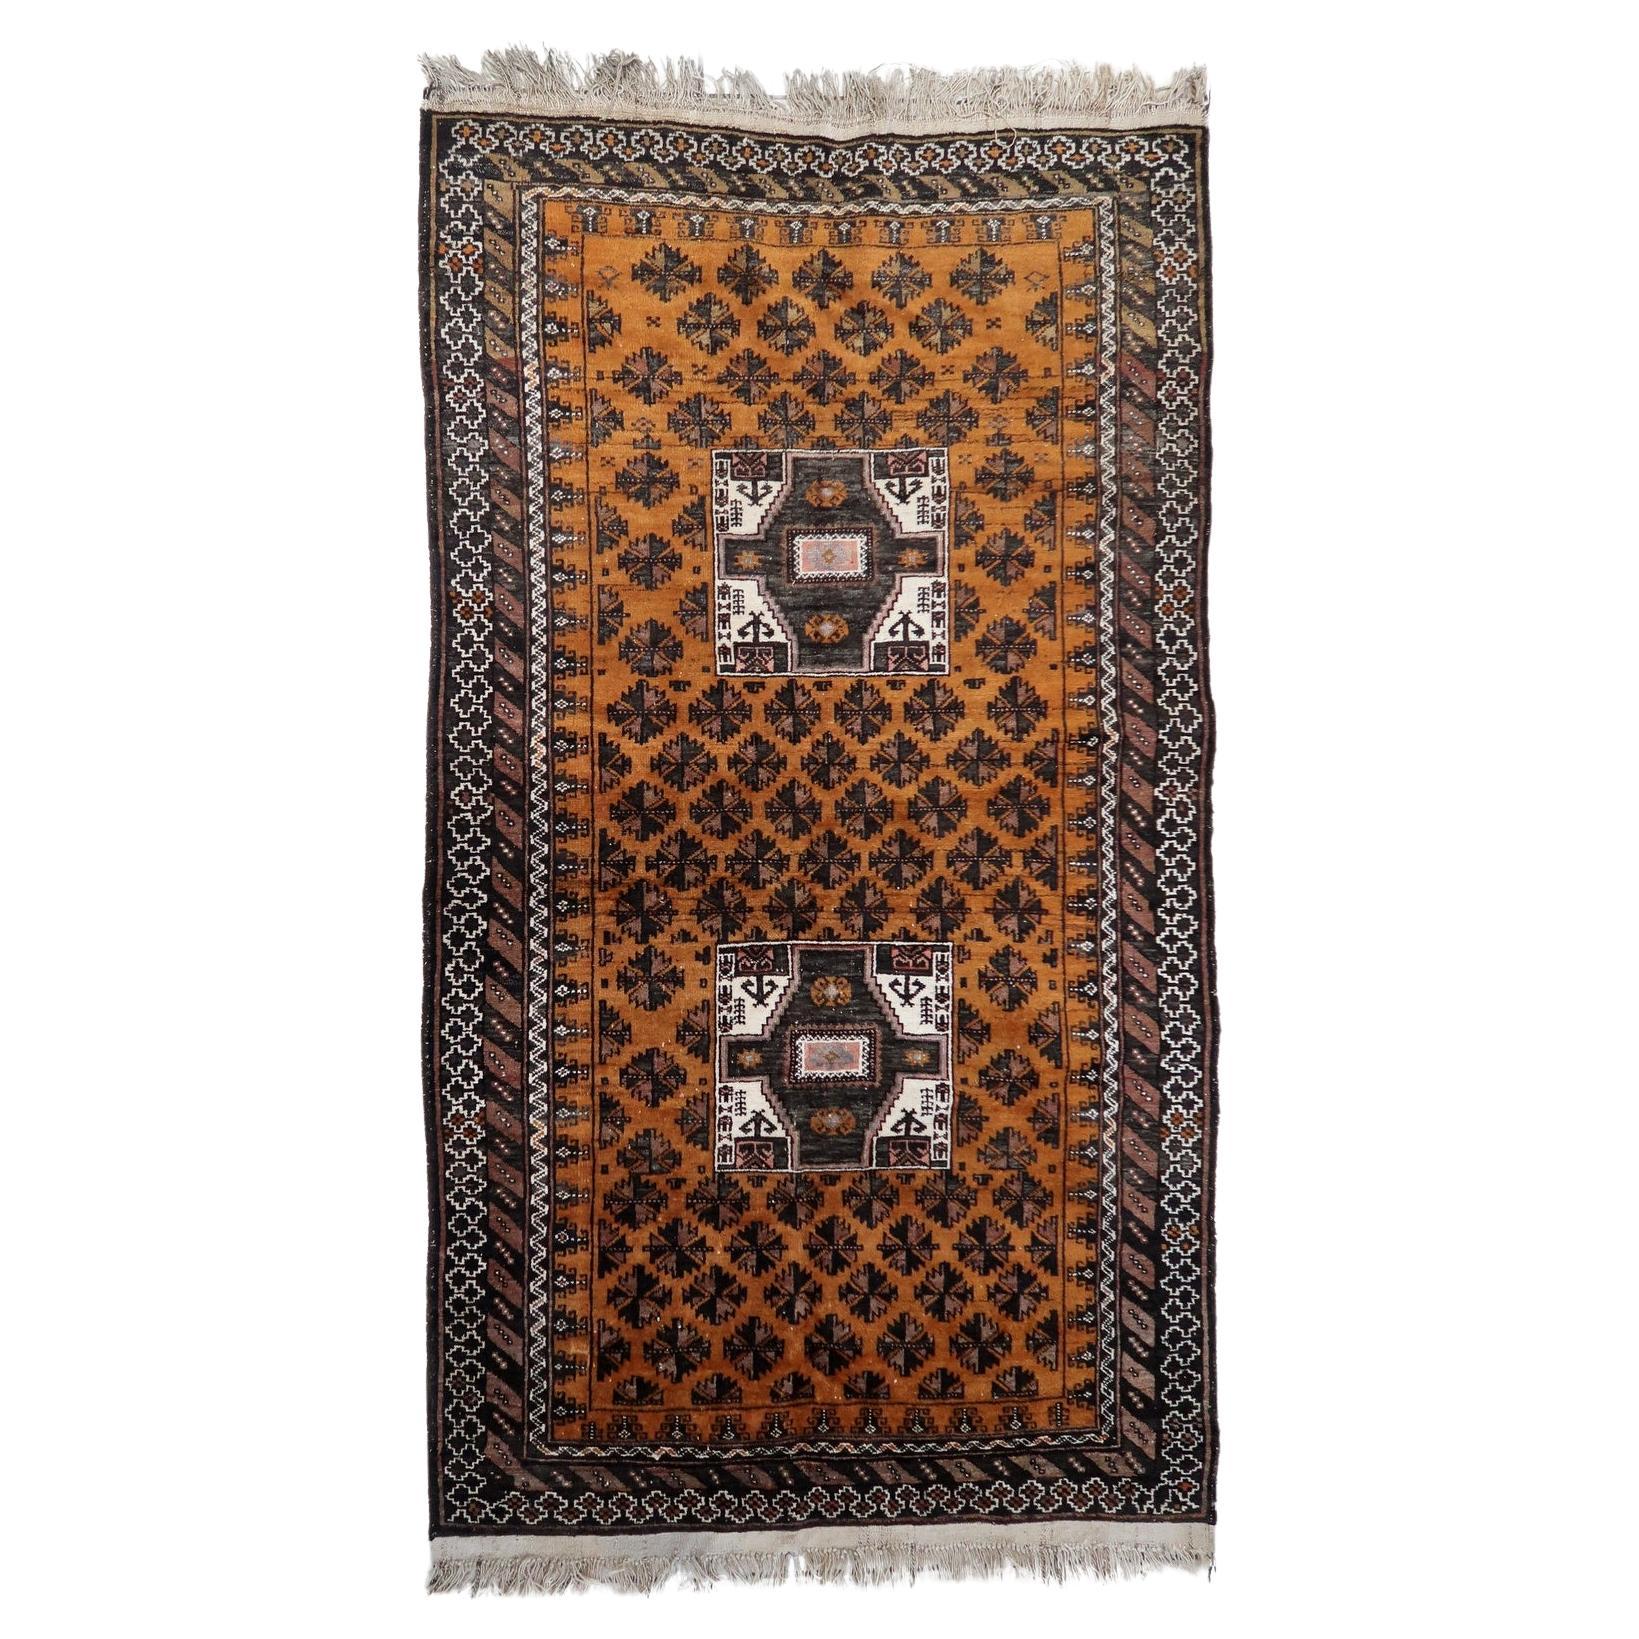 Handmade Antique Afghan Baluch Rug 3.5' x 6.2', 1920s - 1C1117 For Sale